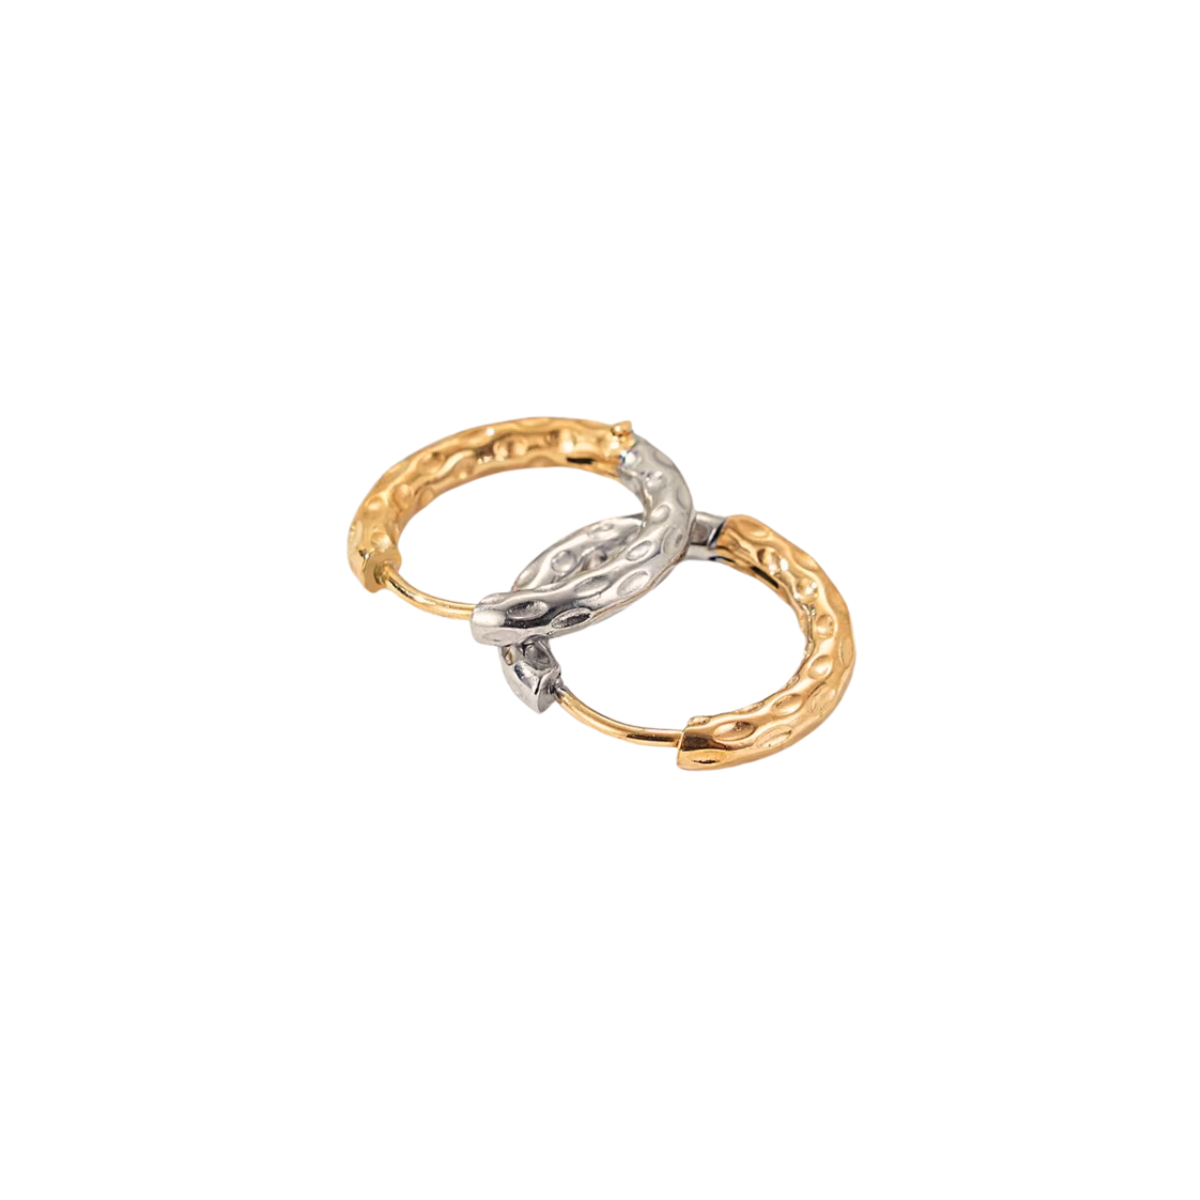 Lolita 18k Gold Plated And Silver Huggie Earrings